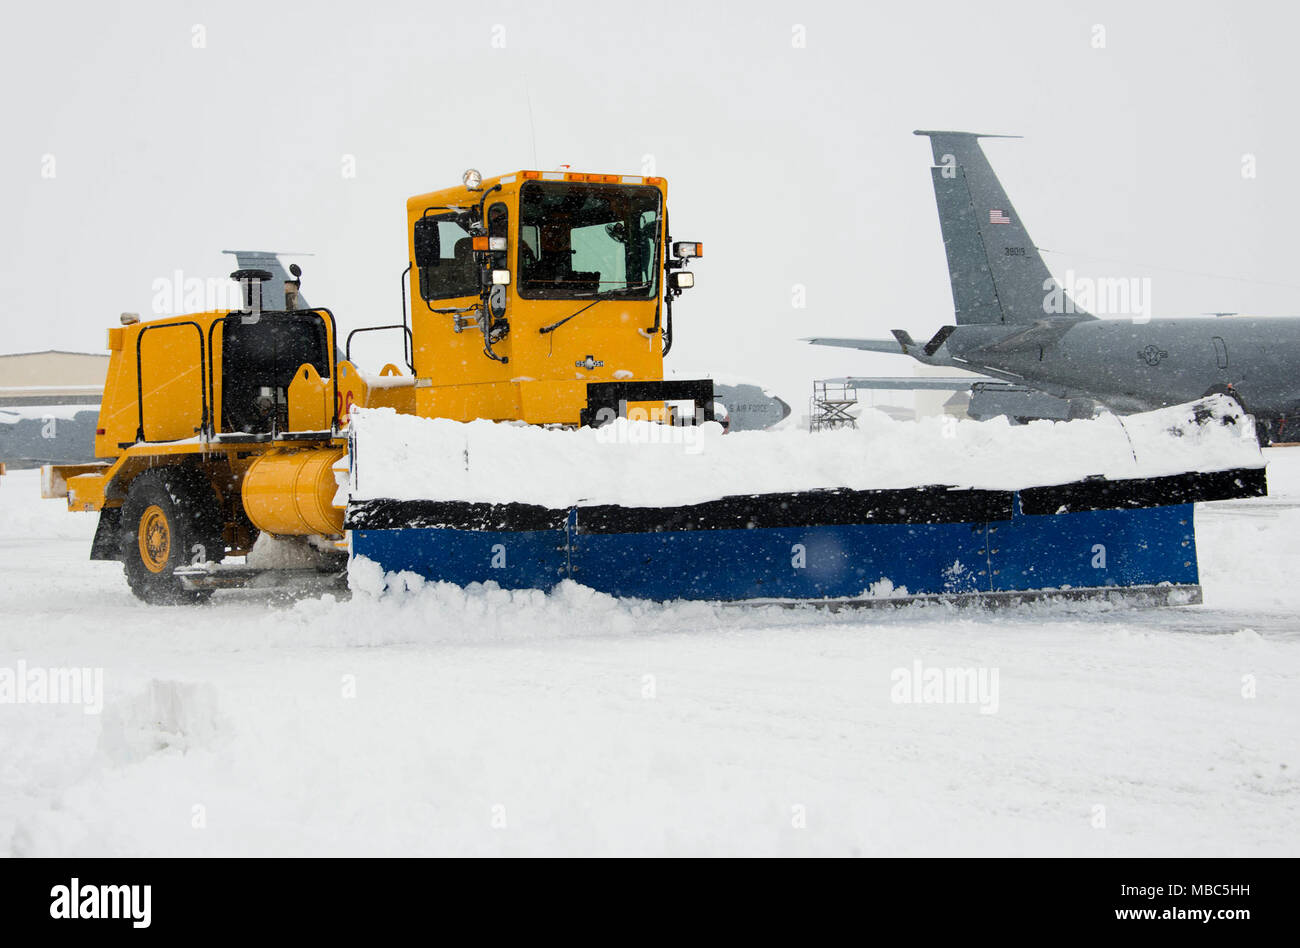 The 92nd Civil Engineer Squadron snow removal trucks clear the flight line at Fairchild Air Force Base, Washington, Feb. 14, 2018. Team Fairchild’s snow removal team uses a variety of large vehicles to keep the flight line clear including snow plows, snow brooms and snow blowers. Team Fairchild’s snow barn is responsible for snow and ice control across the flight line, all aircraft parking areas and taxiways. (U.S. Air Force photo/Senior Airman Janelle Patiño) Stock Photo